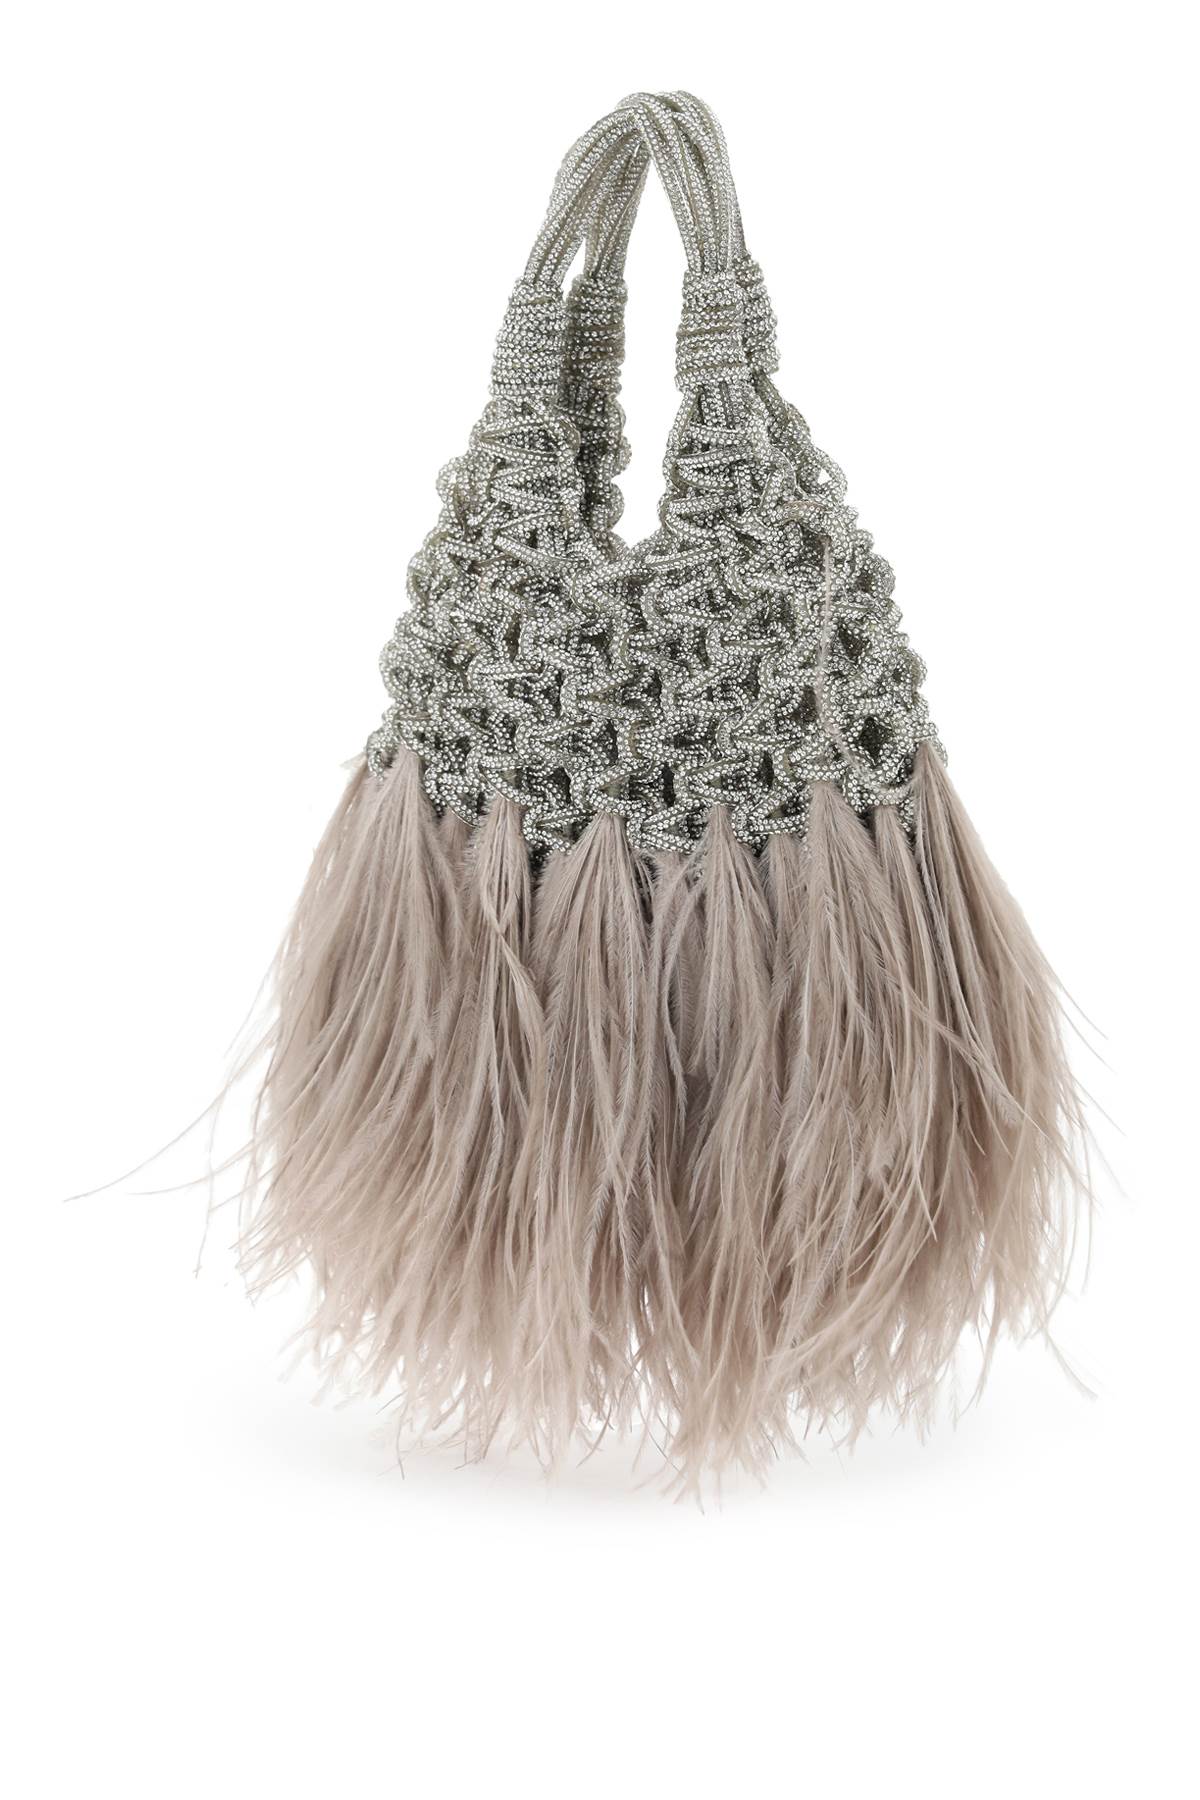 HIBOURAMA Silver Mini Vannifique Hand-Woven Clutch with Ostrich Feathers and Micro Crystals